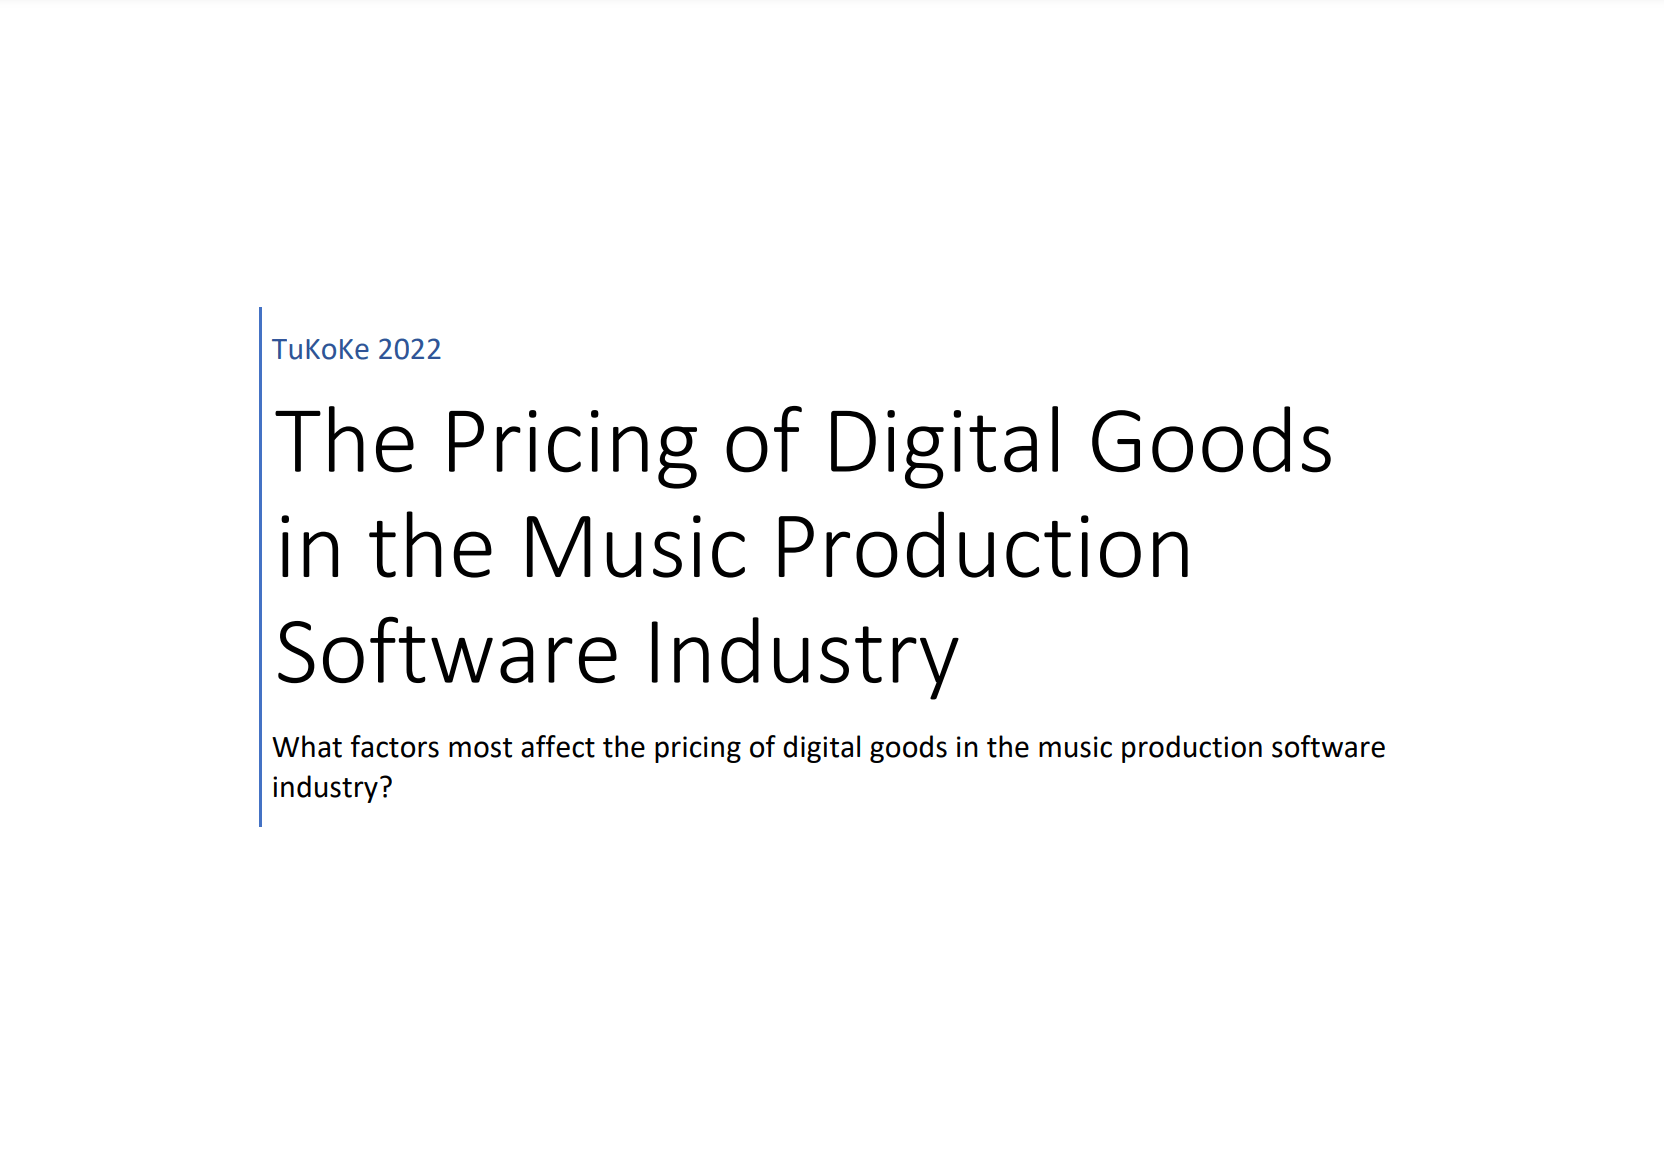 Summary of The Pricing of Digital Goods in the Music Production Software Industry document